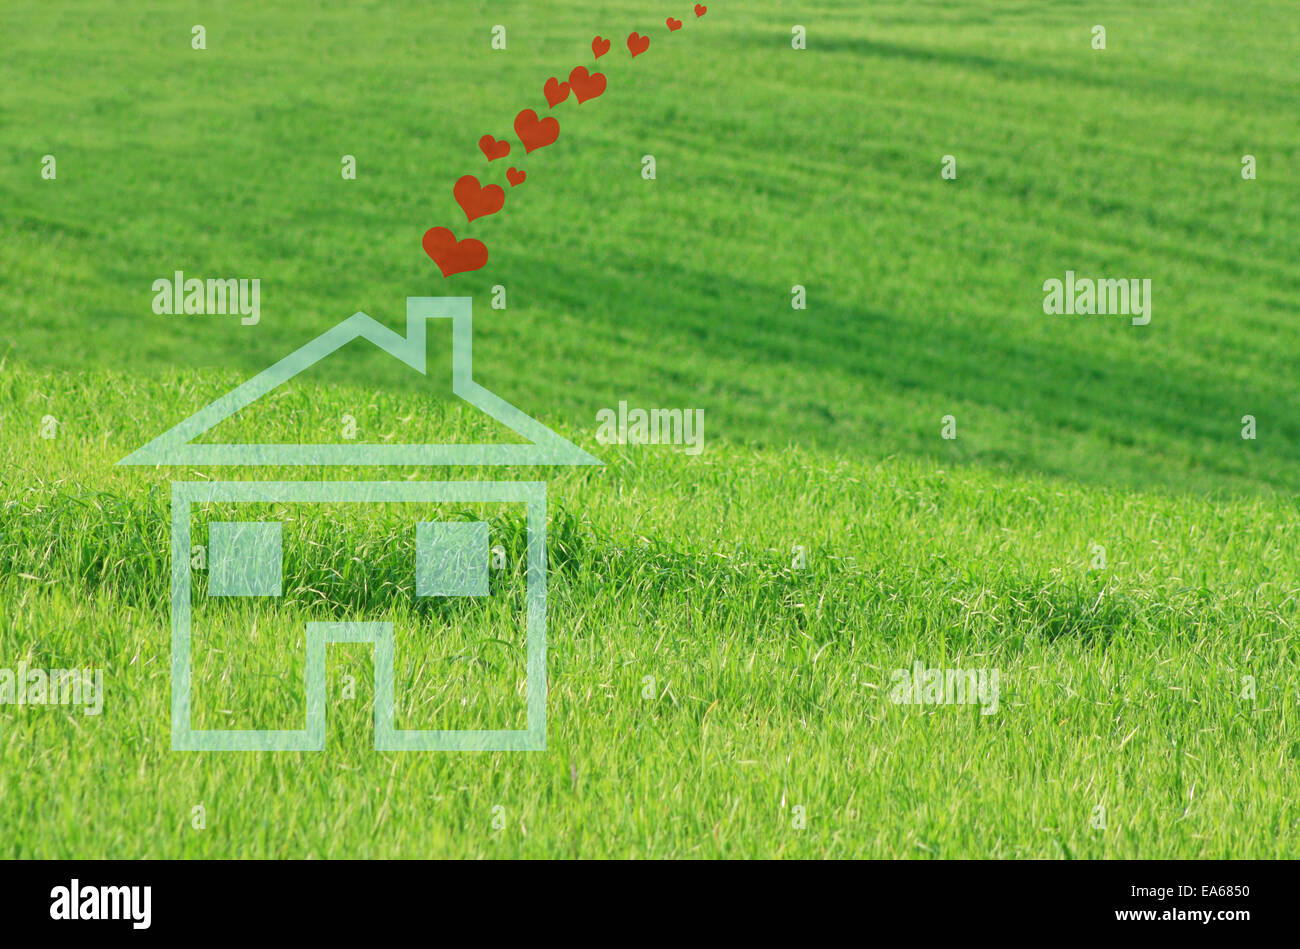 Dream house with hearts Stock Photo